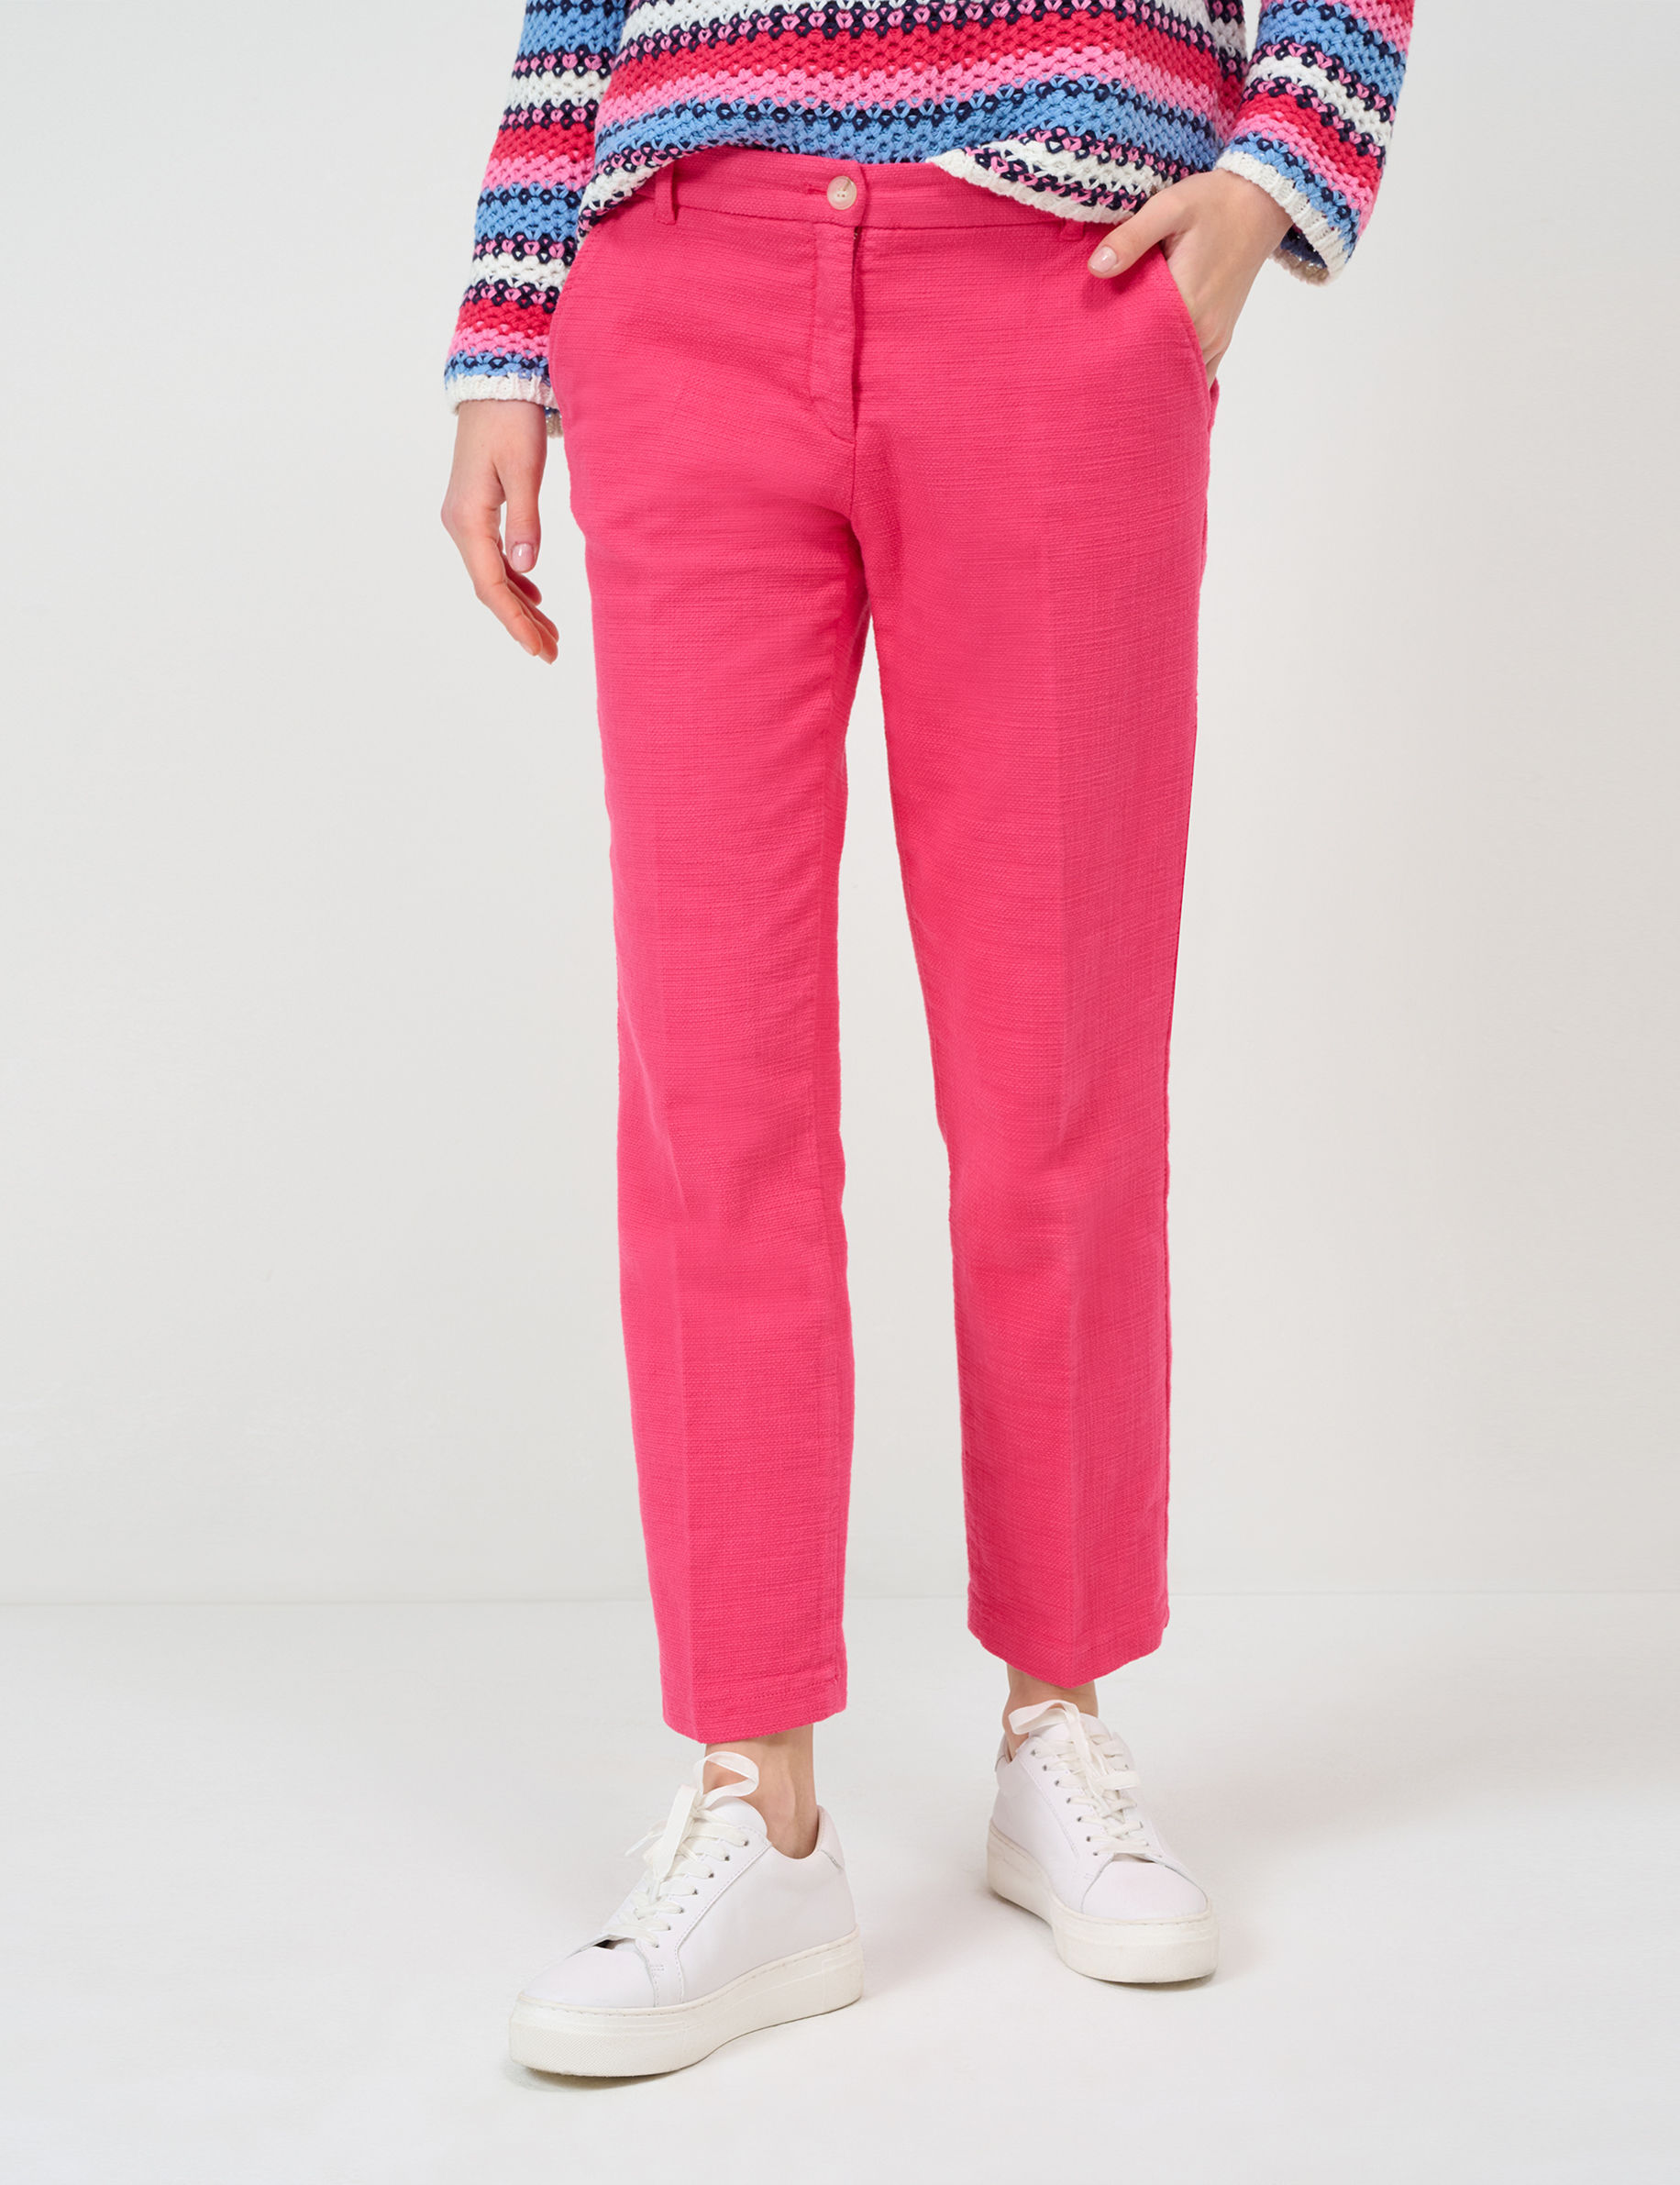 Shades of pink, Women, REGULAR BOOTCUT, Style MARON S, MODEL_FRONT_ISHOP